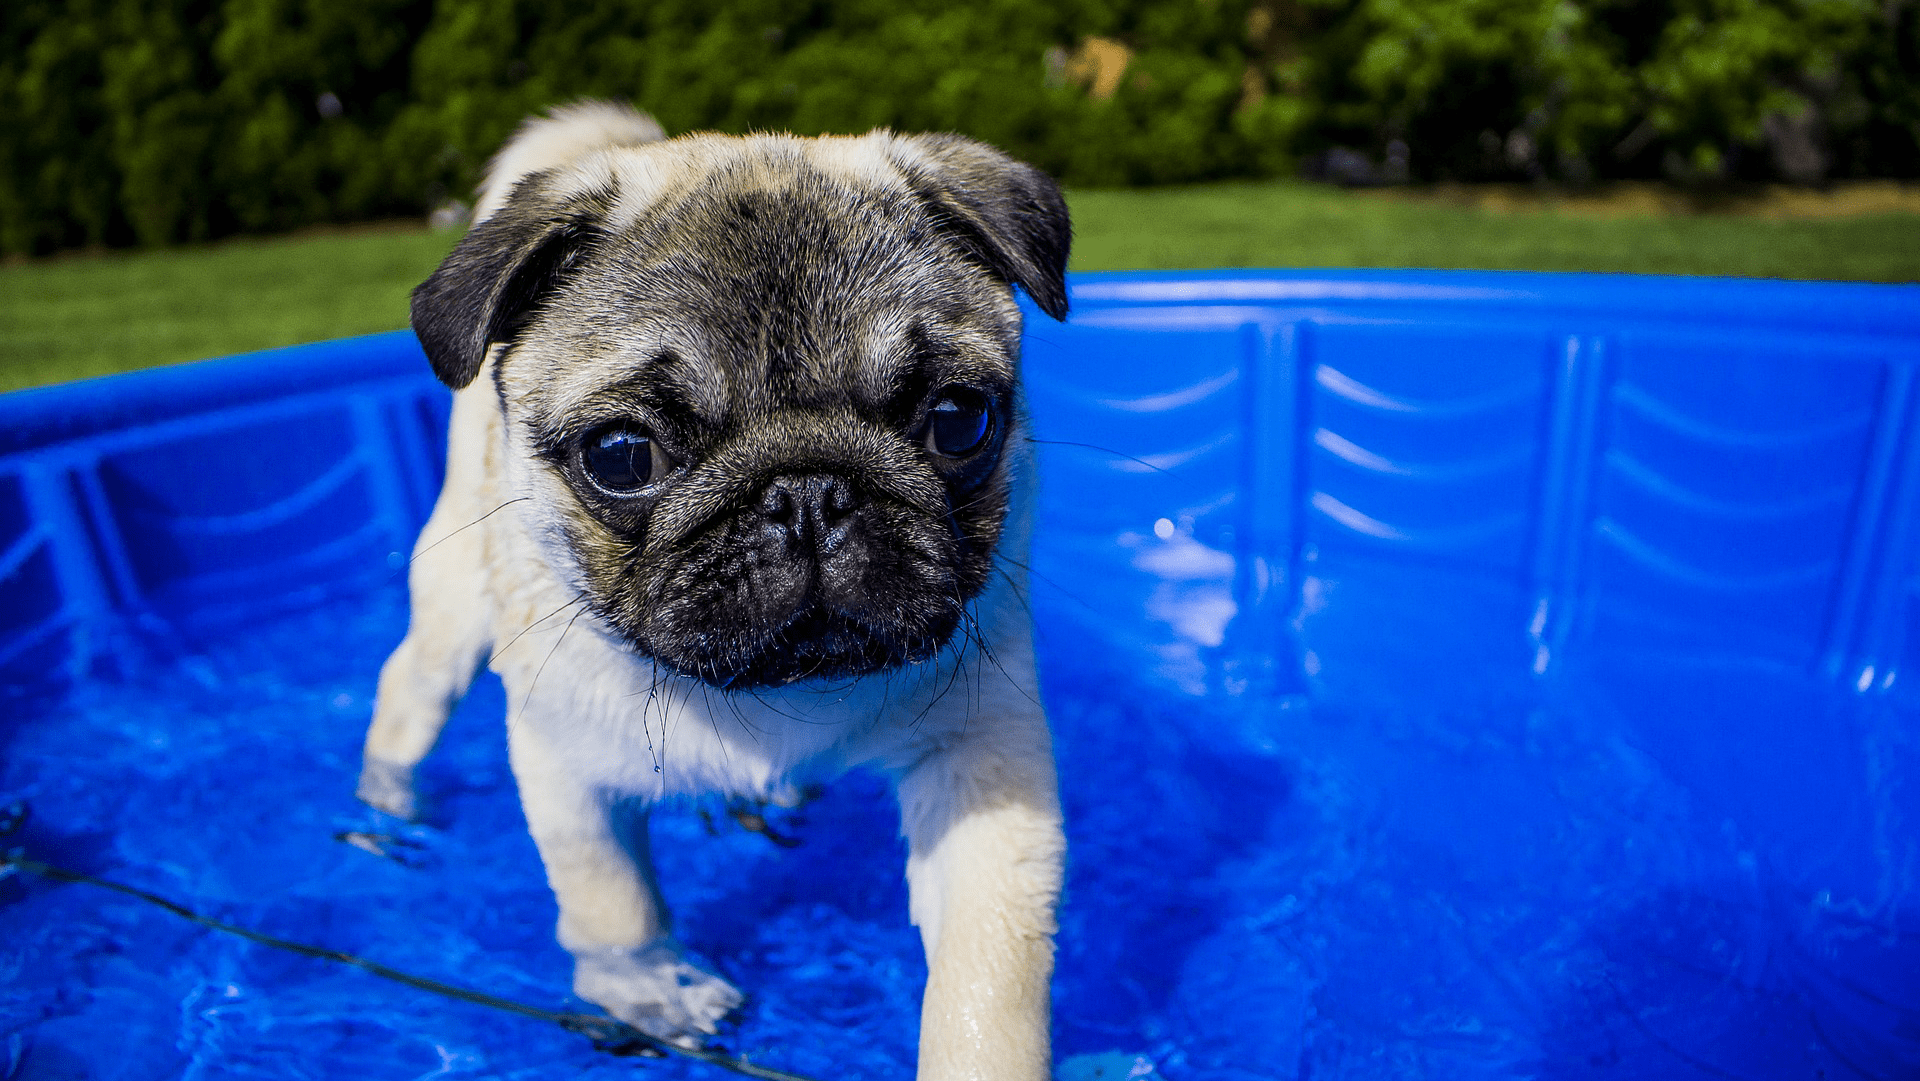 Dive into Pet Water Safety